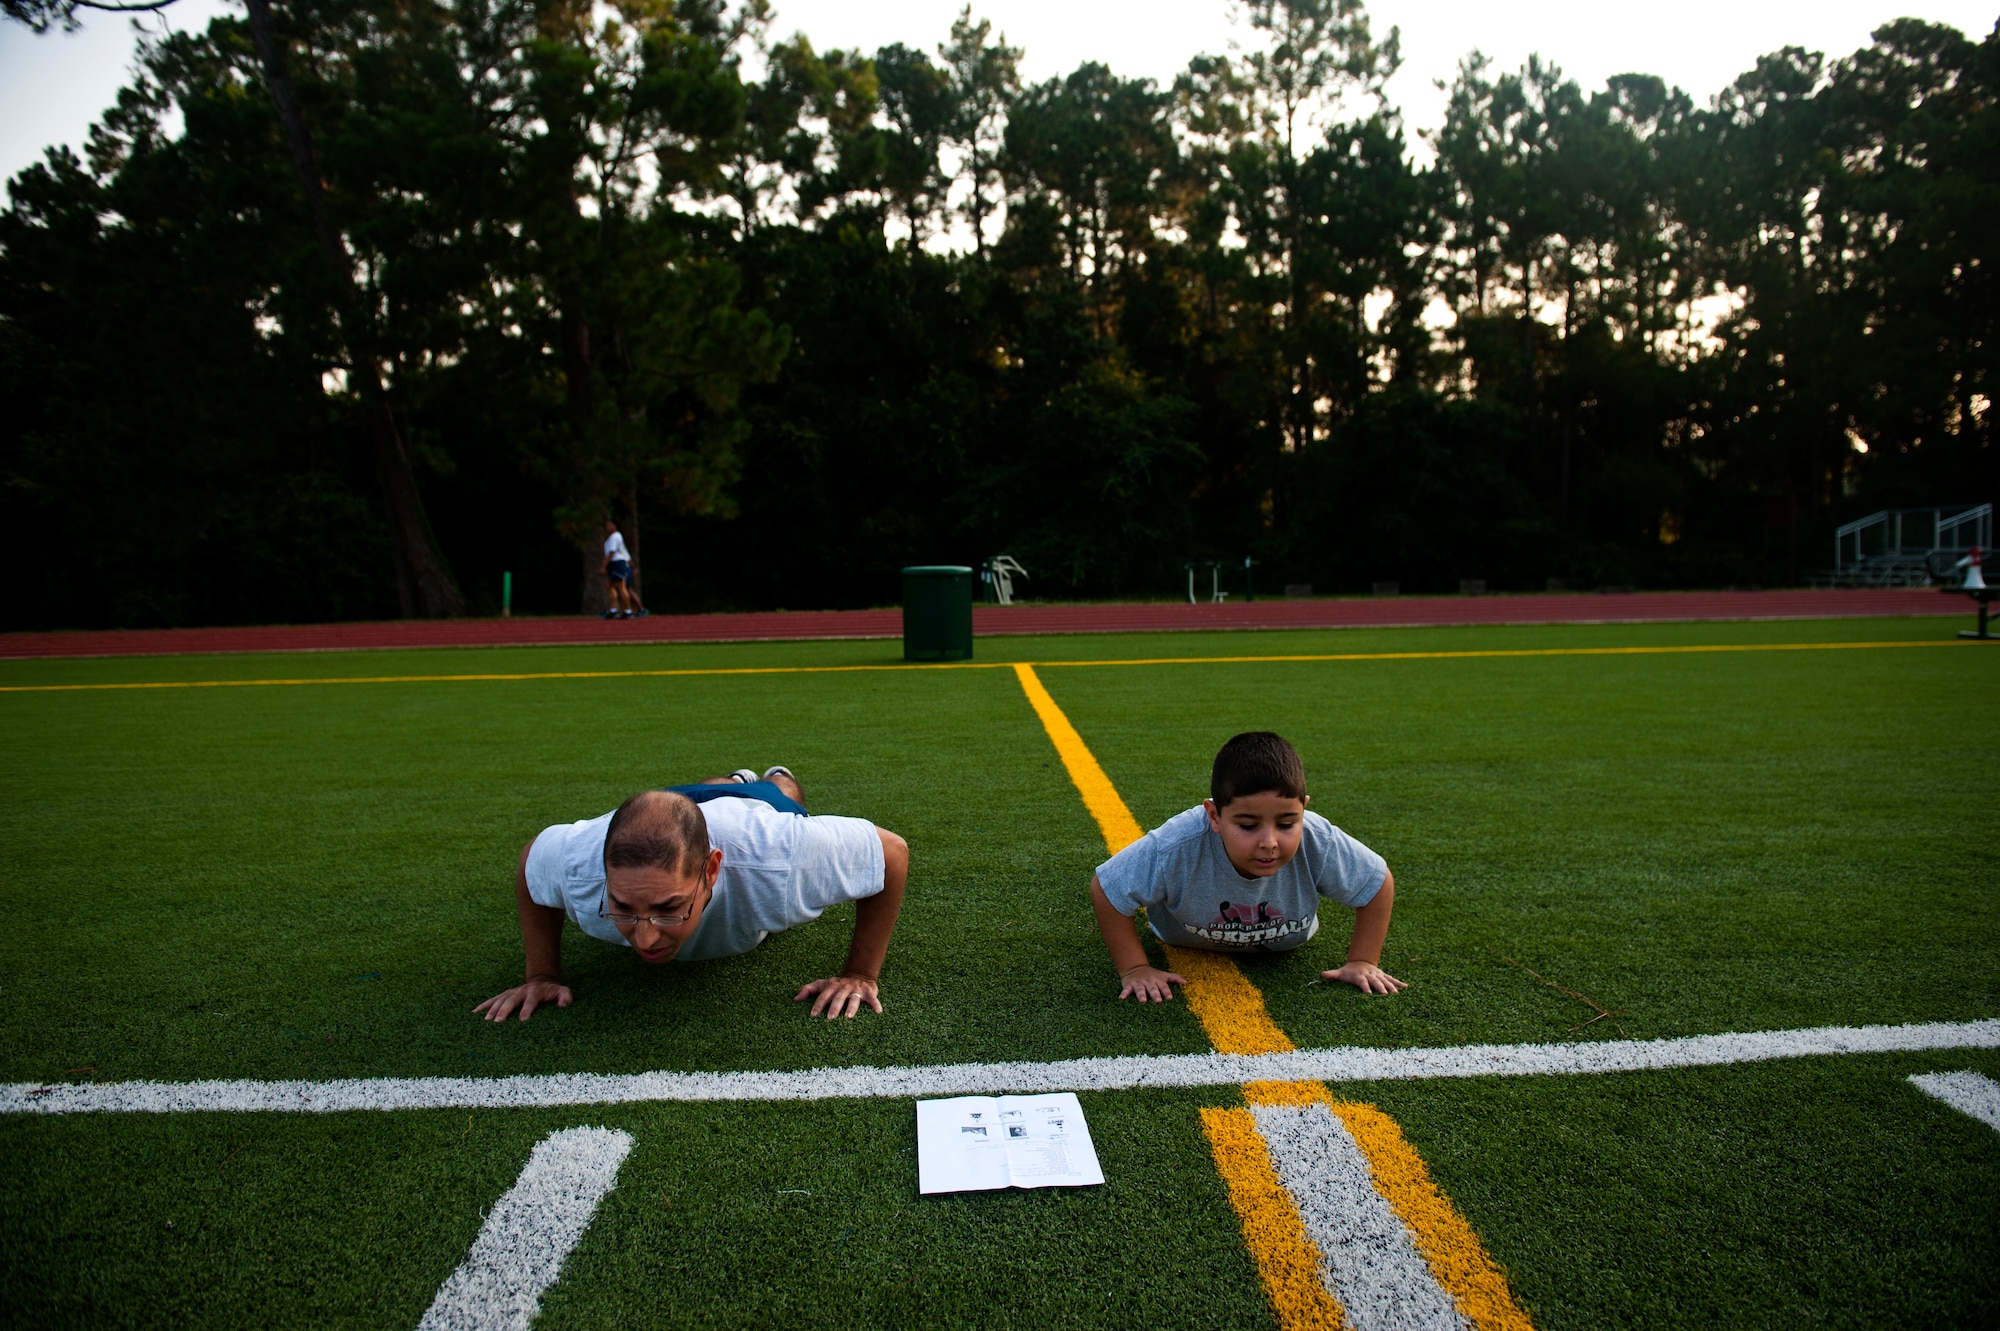 From left, Senior Master Sgt. Manuel Martinez, Air Force Special Operations Command A1 office, leads group physical training with his son, Alessandro, 7, June 29, 2012, at Hurlburt Field, Fla. AFSOC hosted a Bring Your Child to Work Day. (U.S. Air Force photo by Staff Sgt. David Salanitri) 